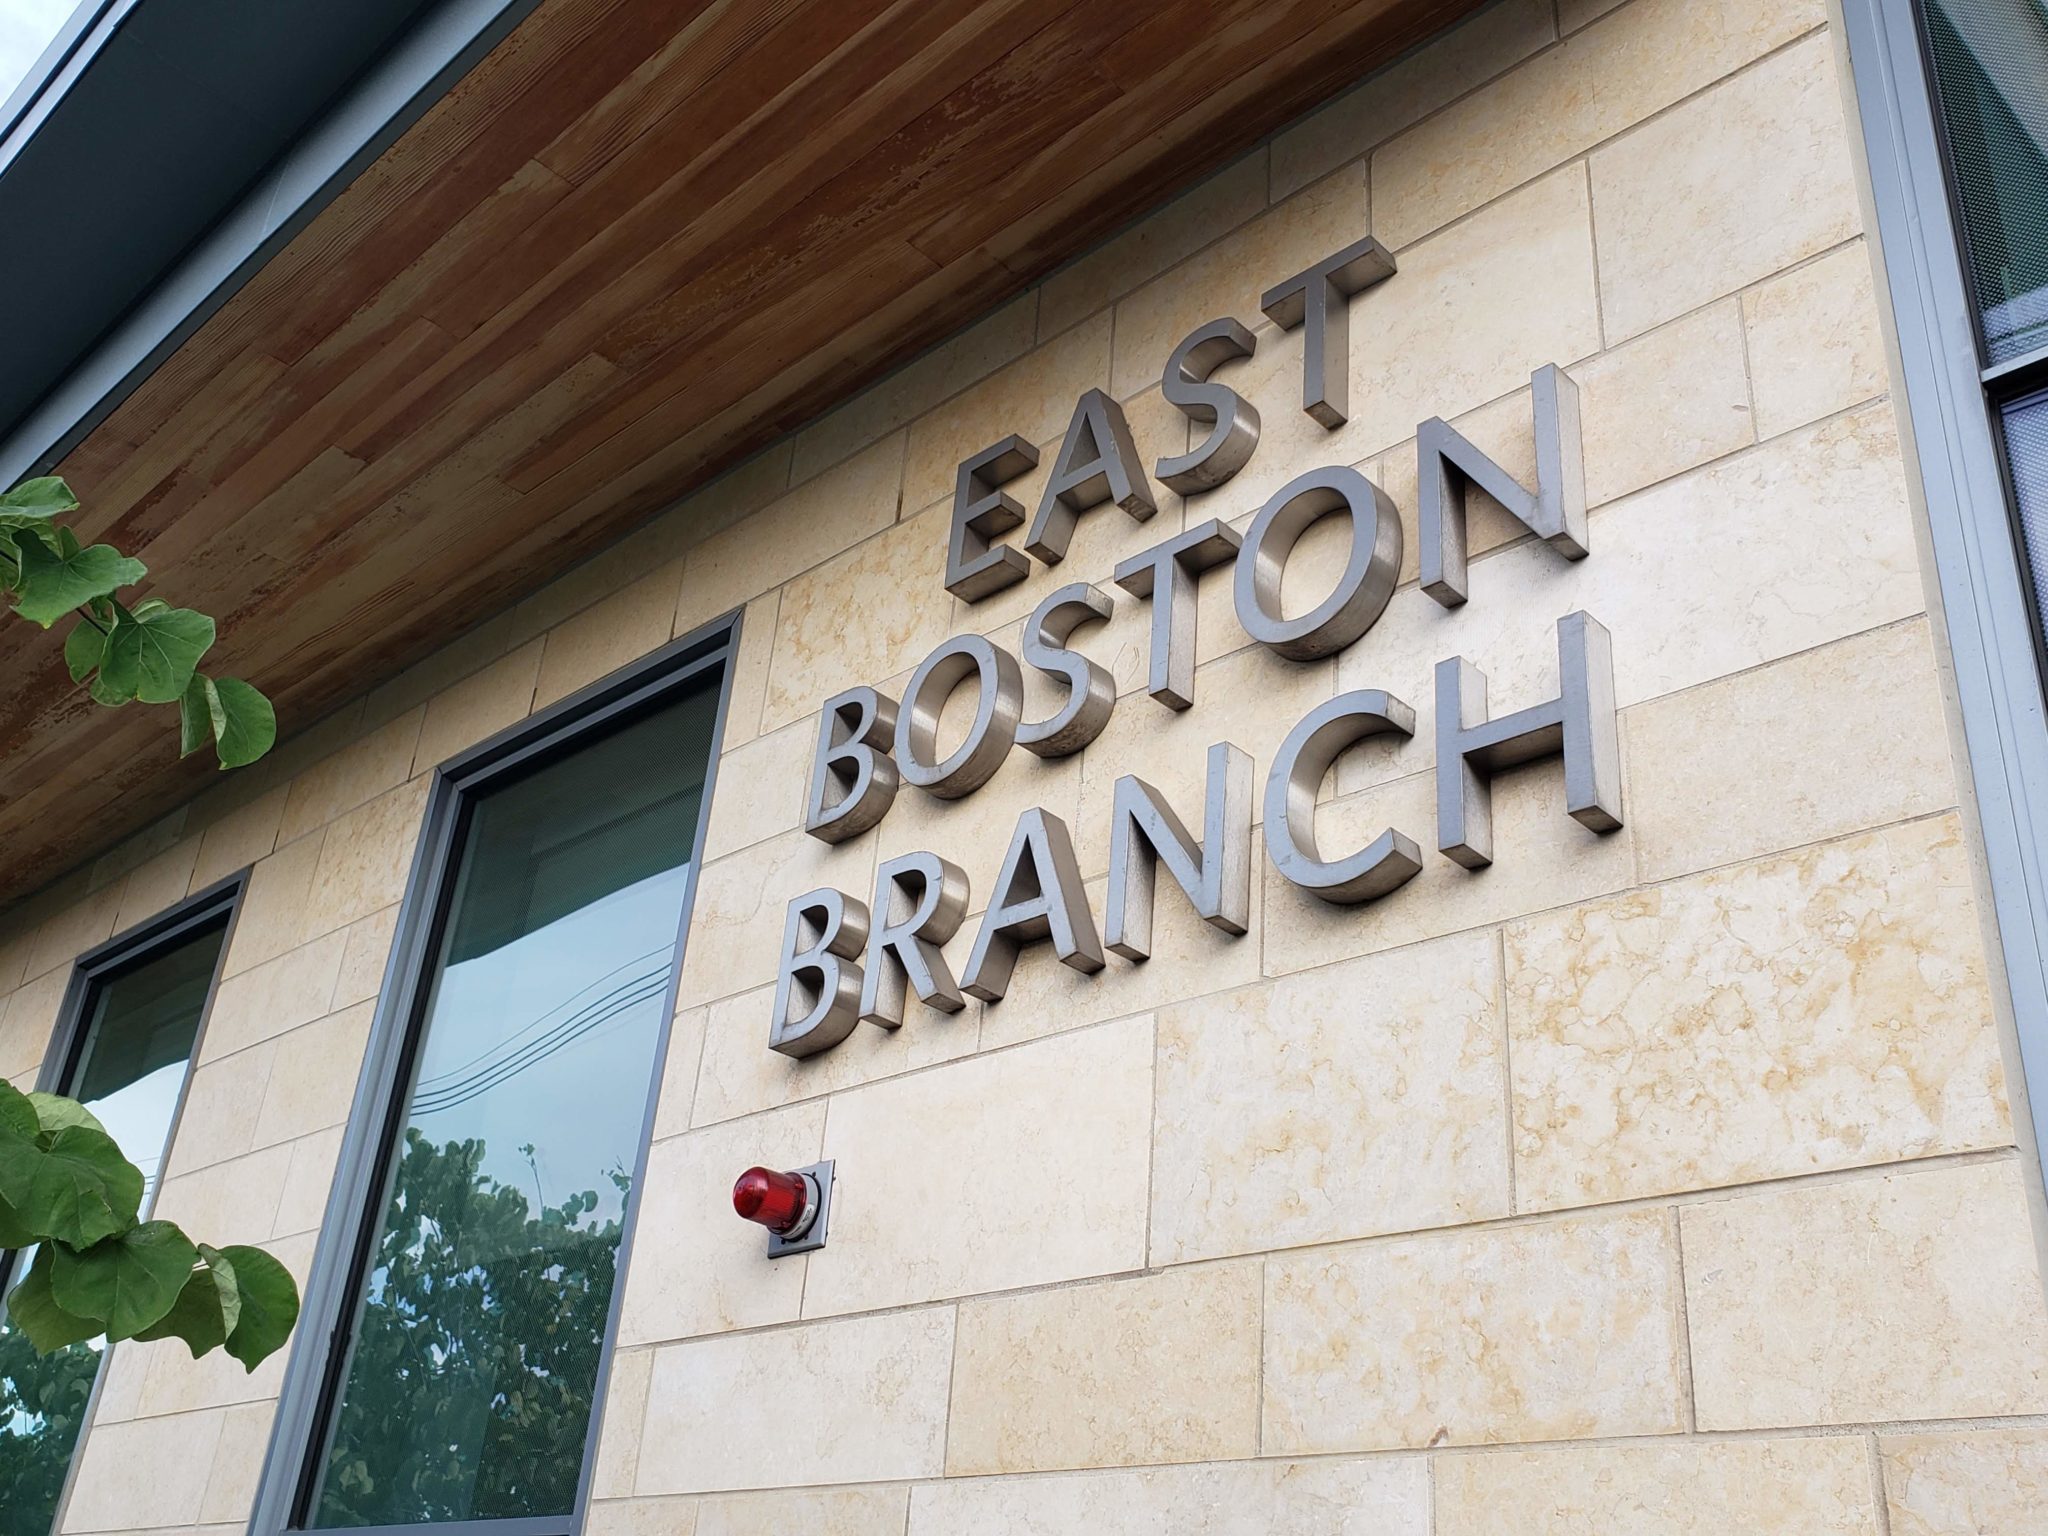 Zoom into the 150th year of the East Boston Branch of the Public